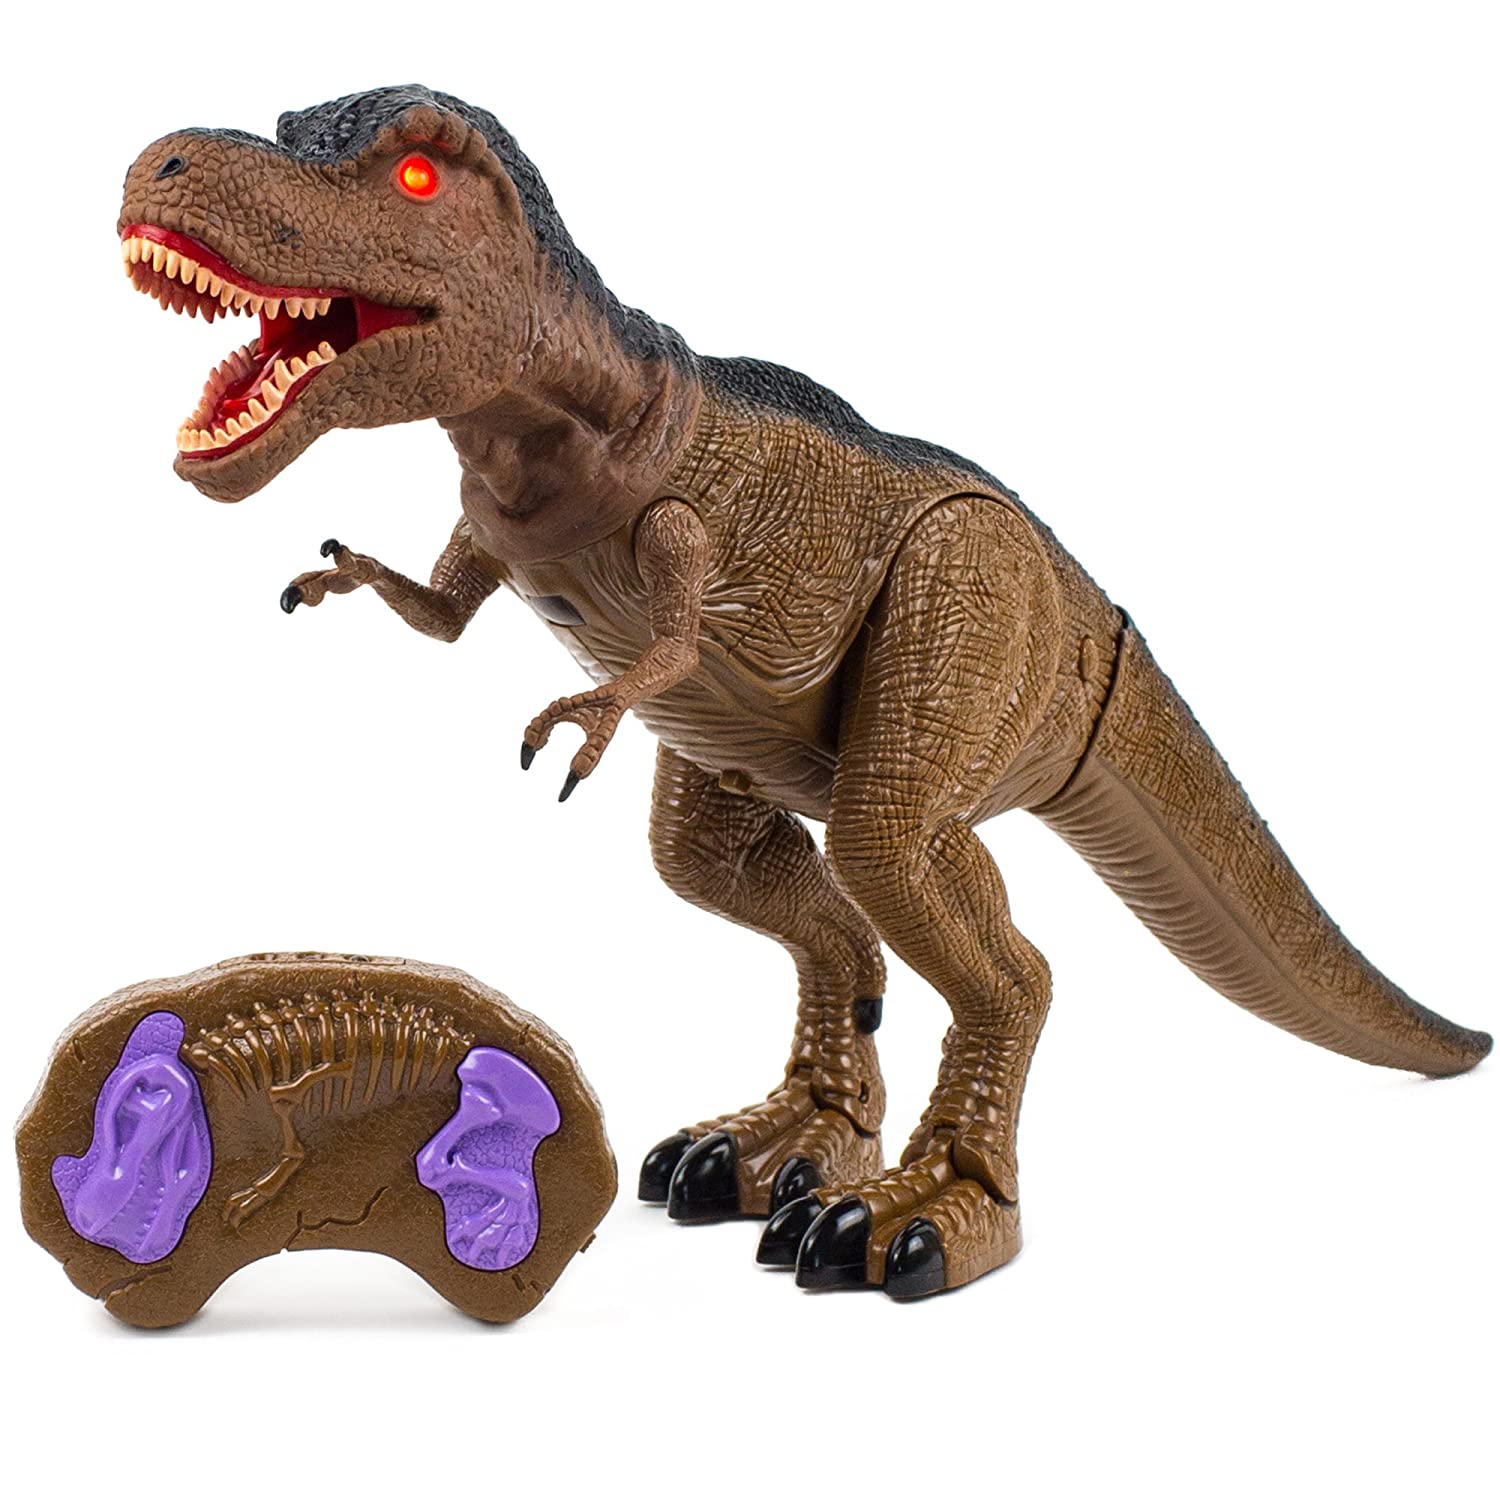 Top 7 Best Robot Dinosaur Toys Reviews in 2022 4